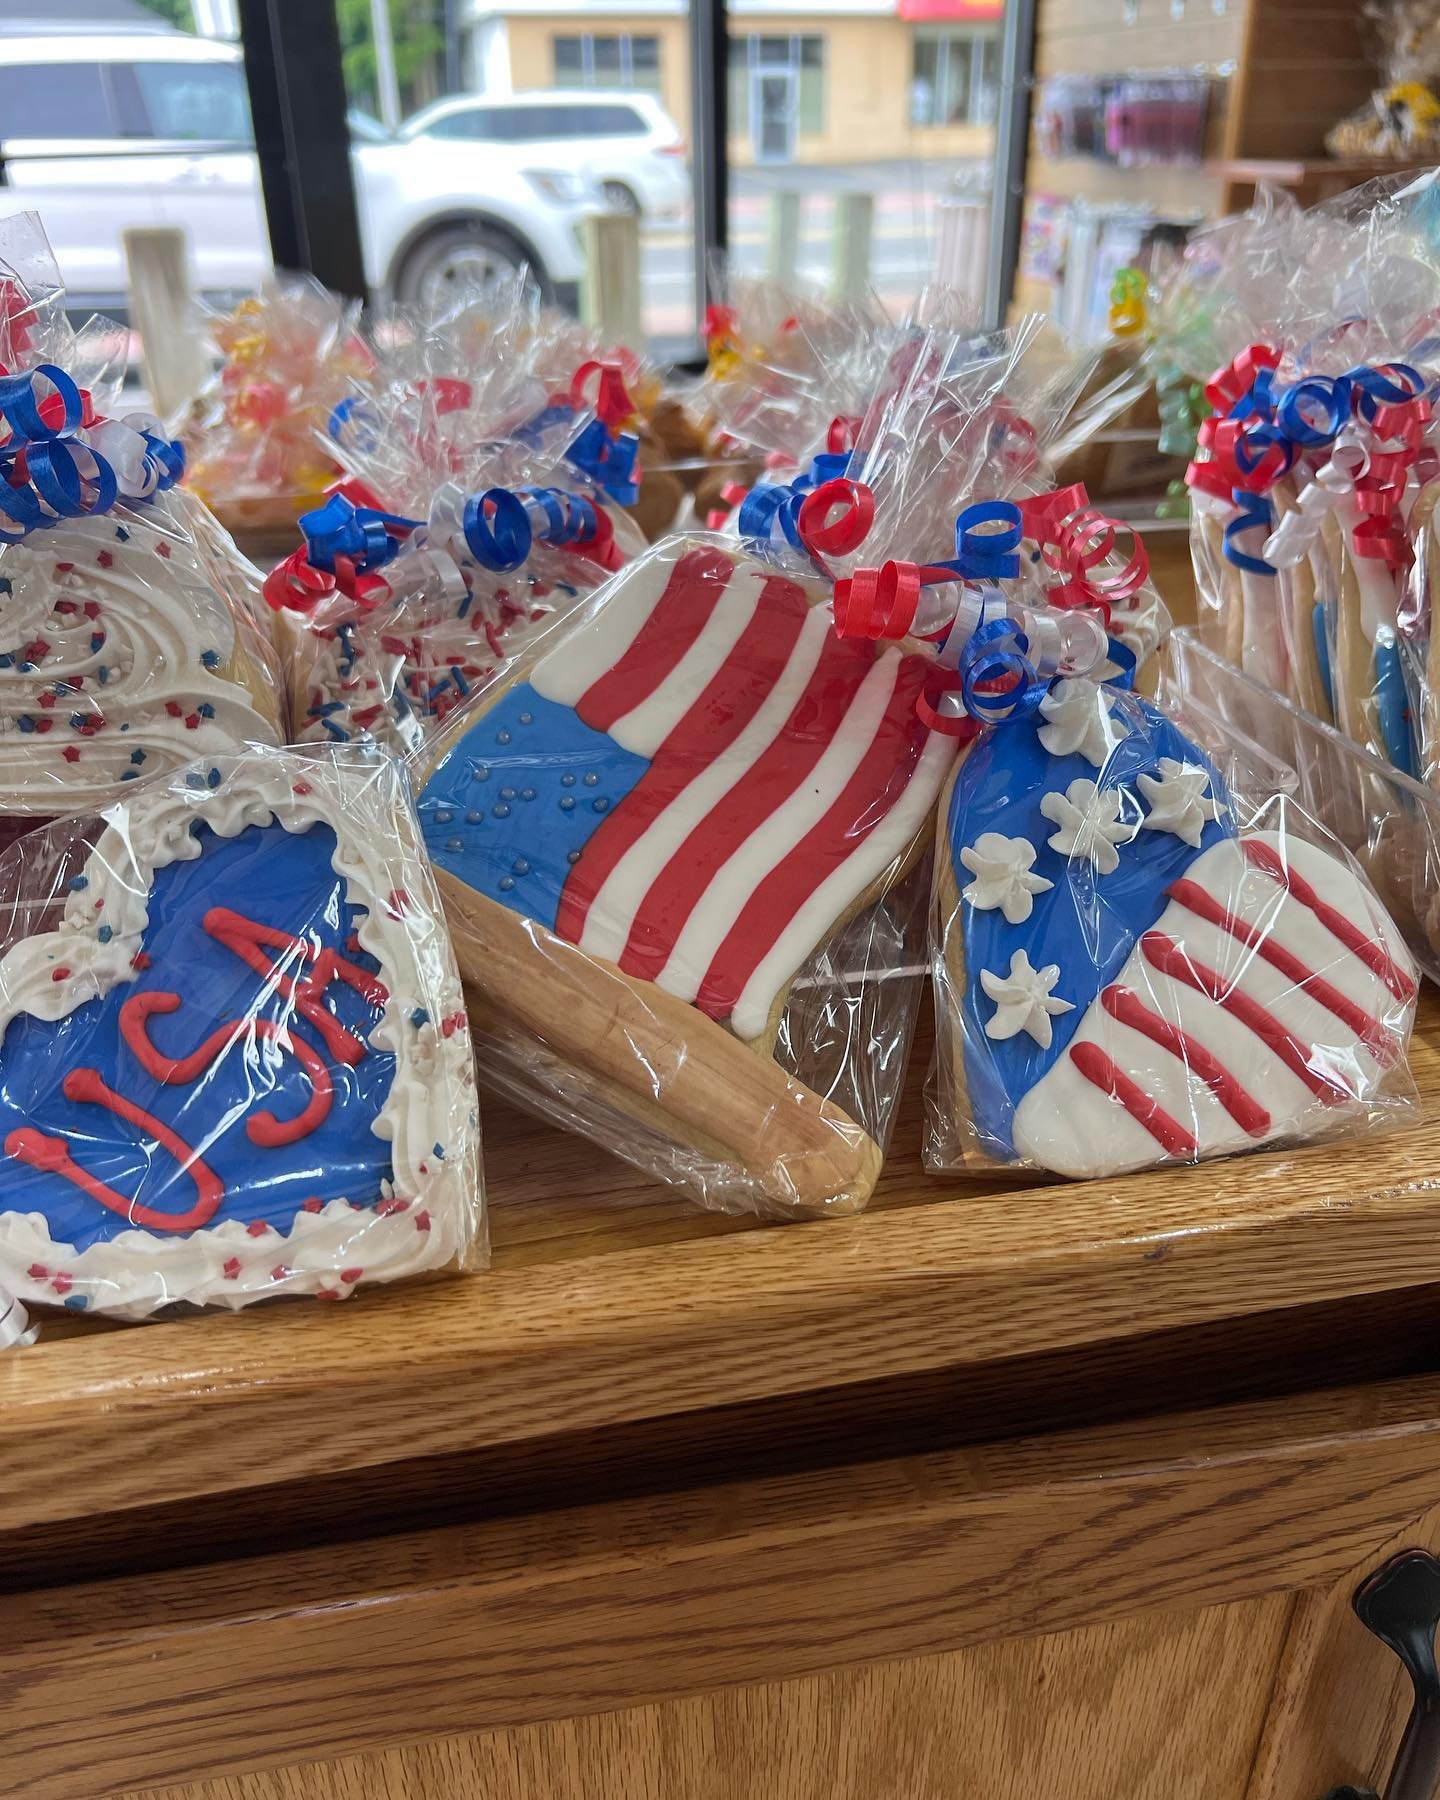 It&rsquo;s Memorial Day weekend!❤️💙Celebrate the start to summer with a treat from Tilda&rsquo;s! 🇺🇸 🍪
-
-
#usa #bakery #longisland #memorialday #cookies #flagcookies #redwhiteandblue